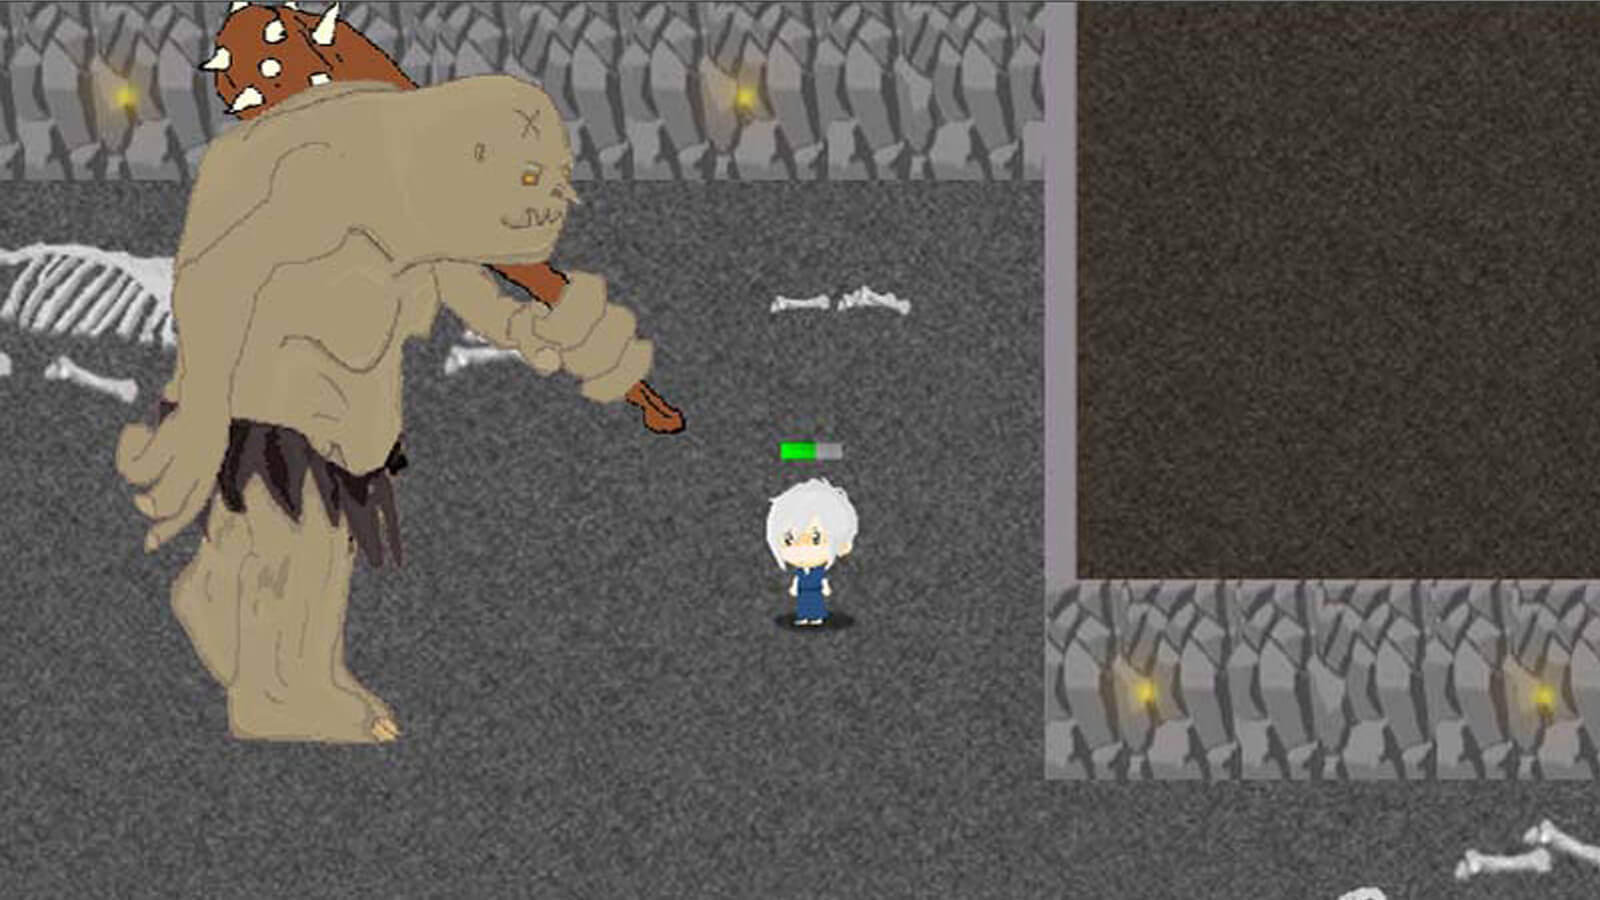 A large brown ogre carrying a spiked club stands next to the player's character in a torch-lit dungeon